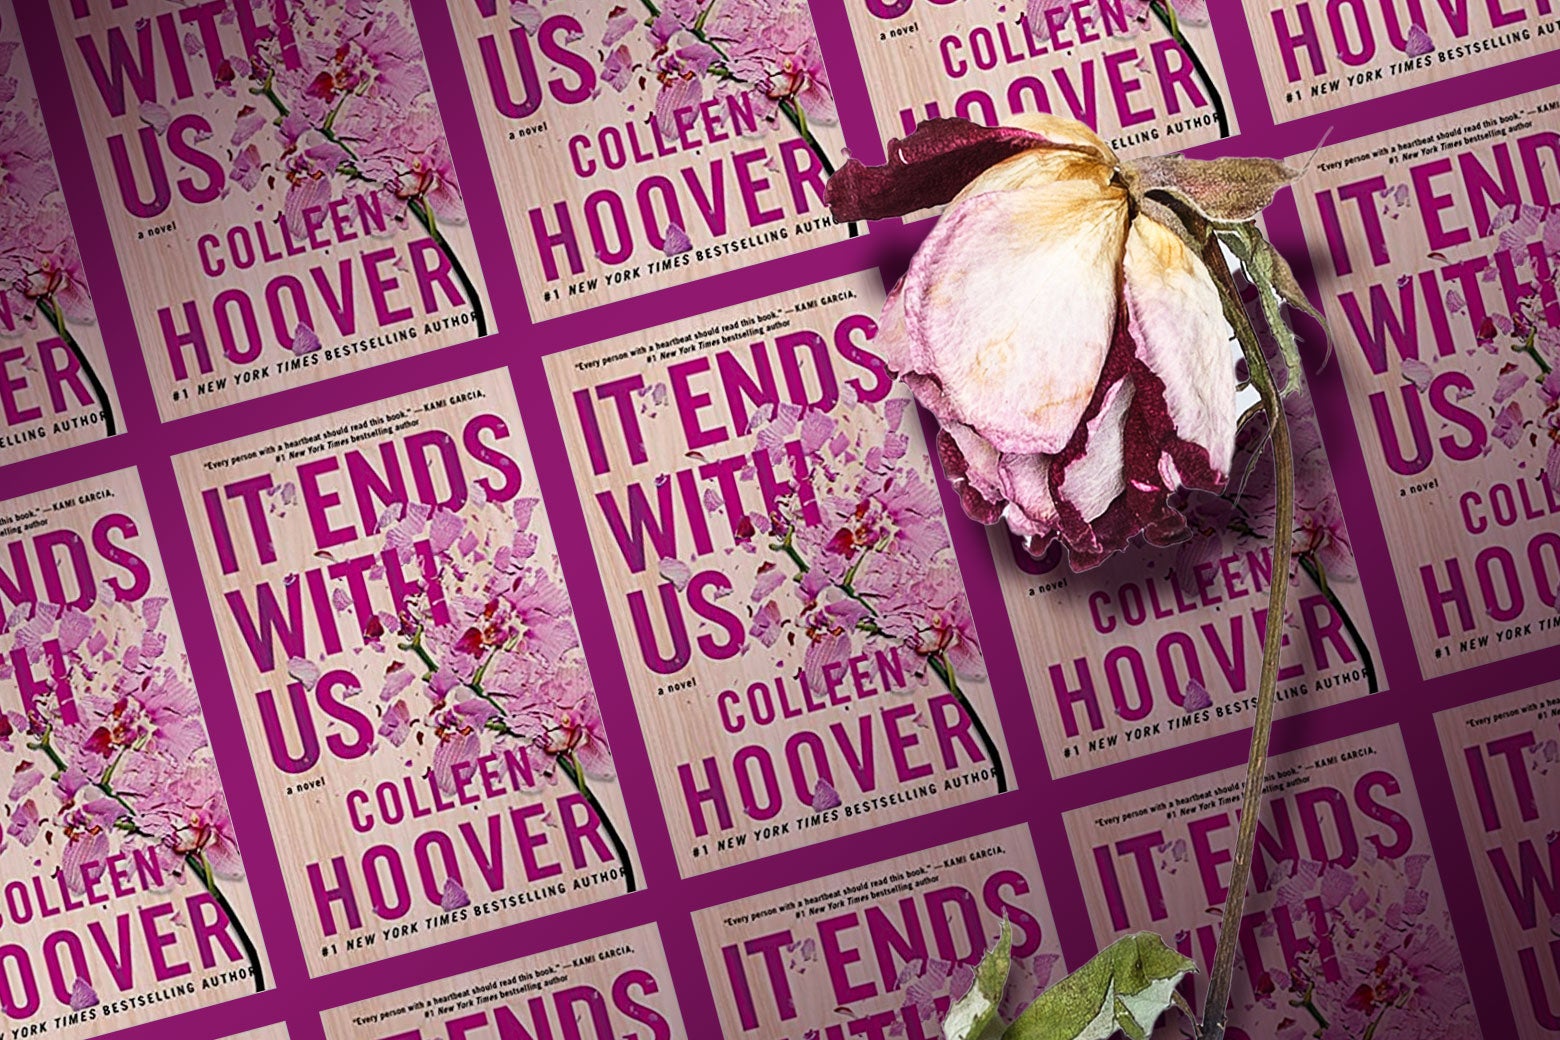 The book's cover is shown but with the pictured flower wilted and dead.